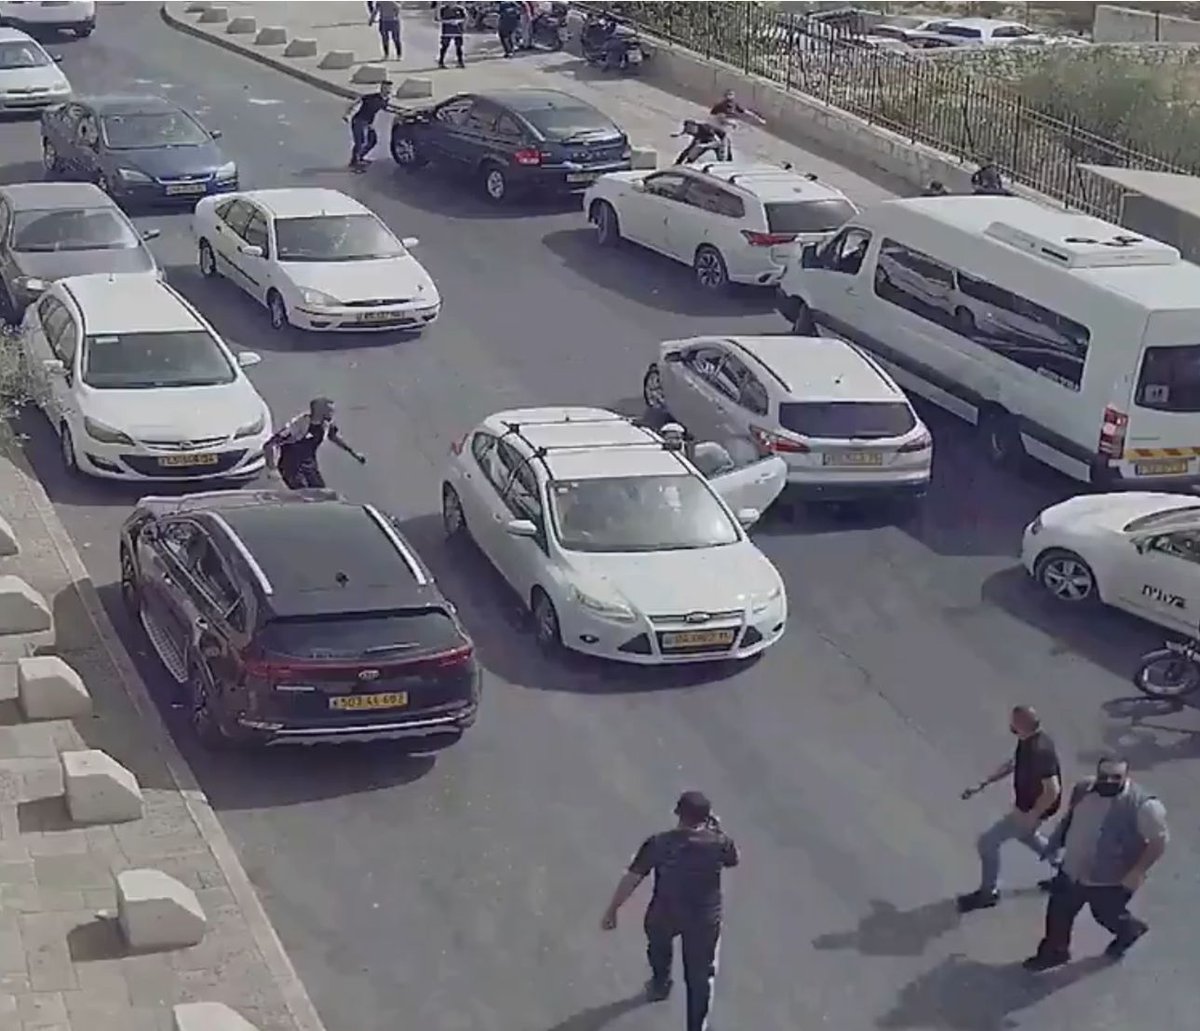 It is just four seconds long. It opens with one Palestinian about to accost the vehicle. However, we can tell that something has happened prior to the opening of this video. The driver’s side door is open. People in the background appear to be taking cover.